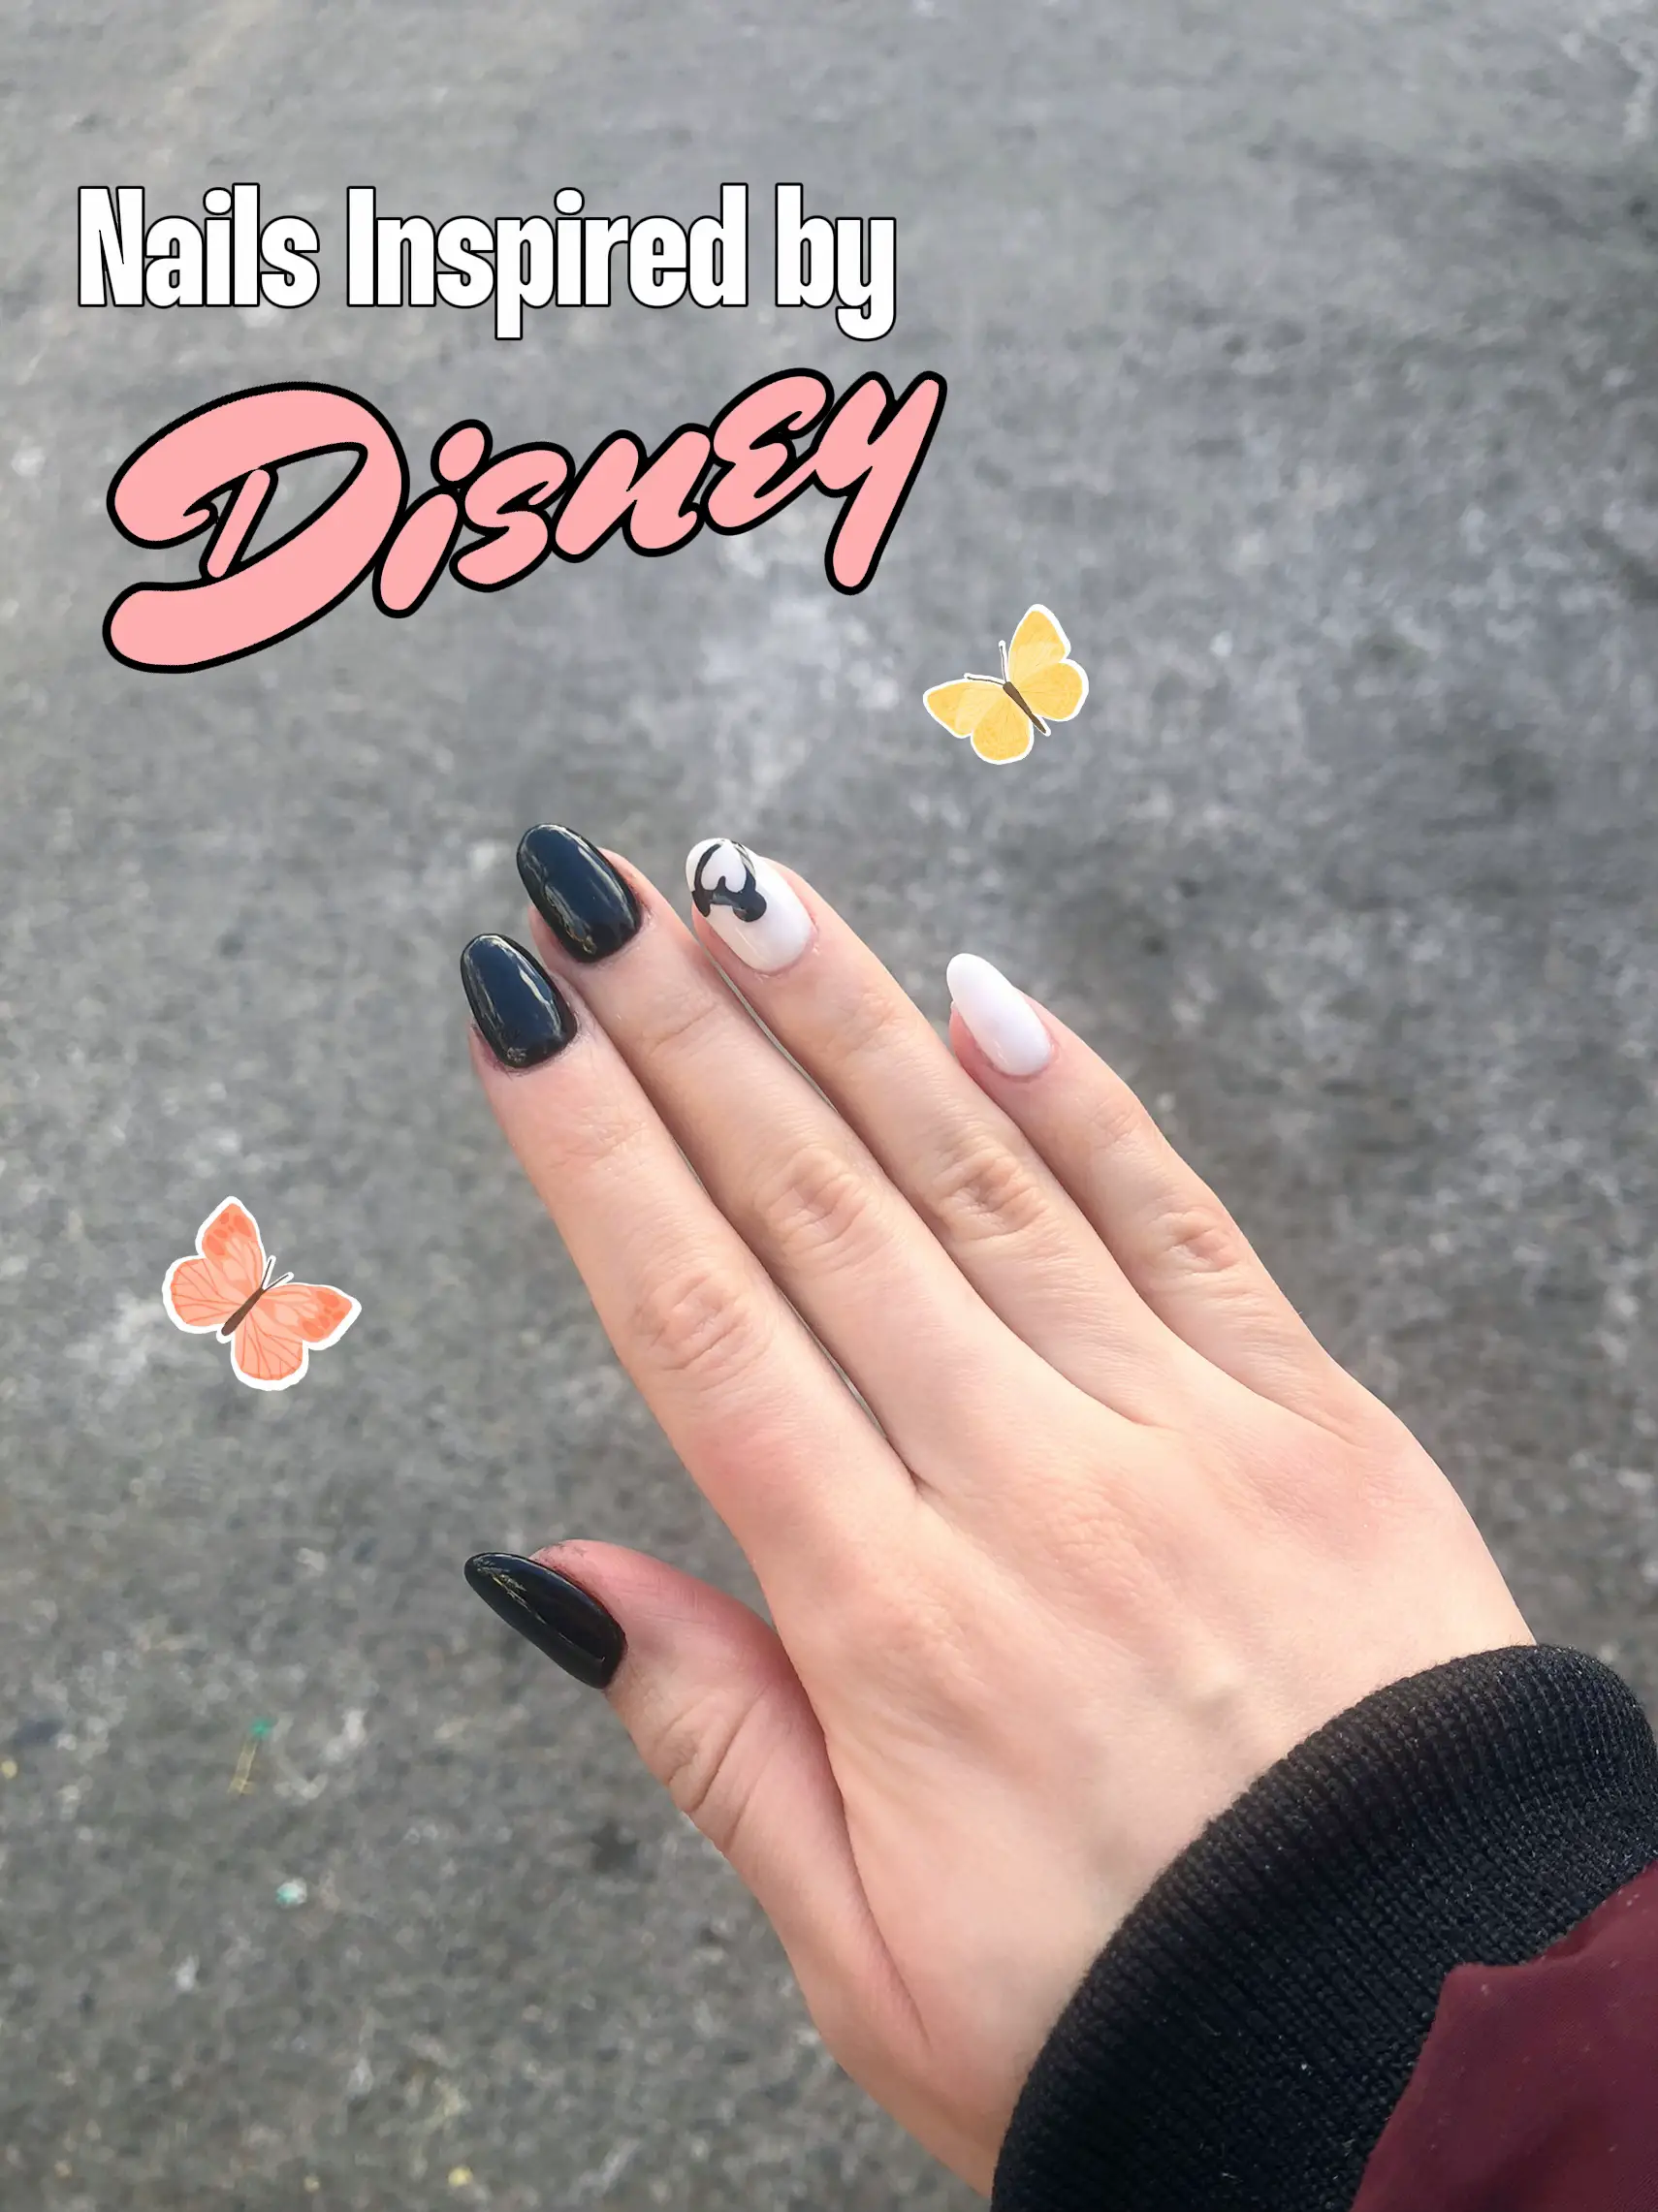 The perfect spooky disney nails!🎃👻🍁, Gallery posted by Aleeah Noelle